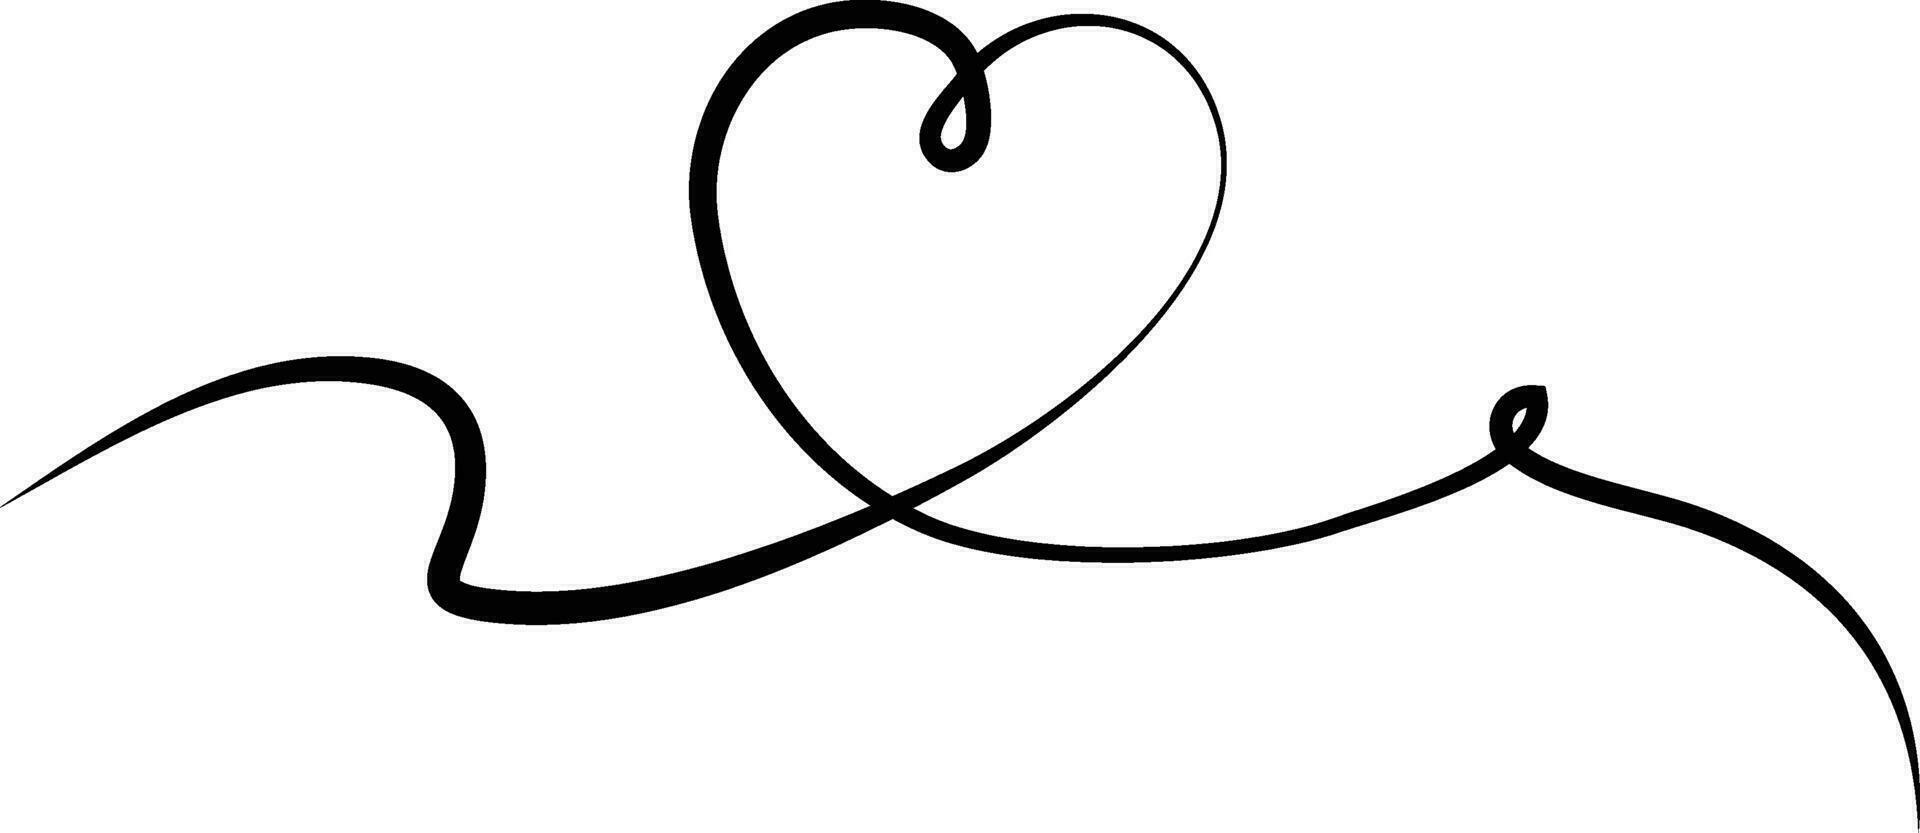 One continuous drawing of heart and shape love sign. Thin flourish and romantic symbols in simple linear style. Love doodle vector illustration.